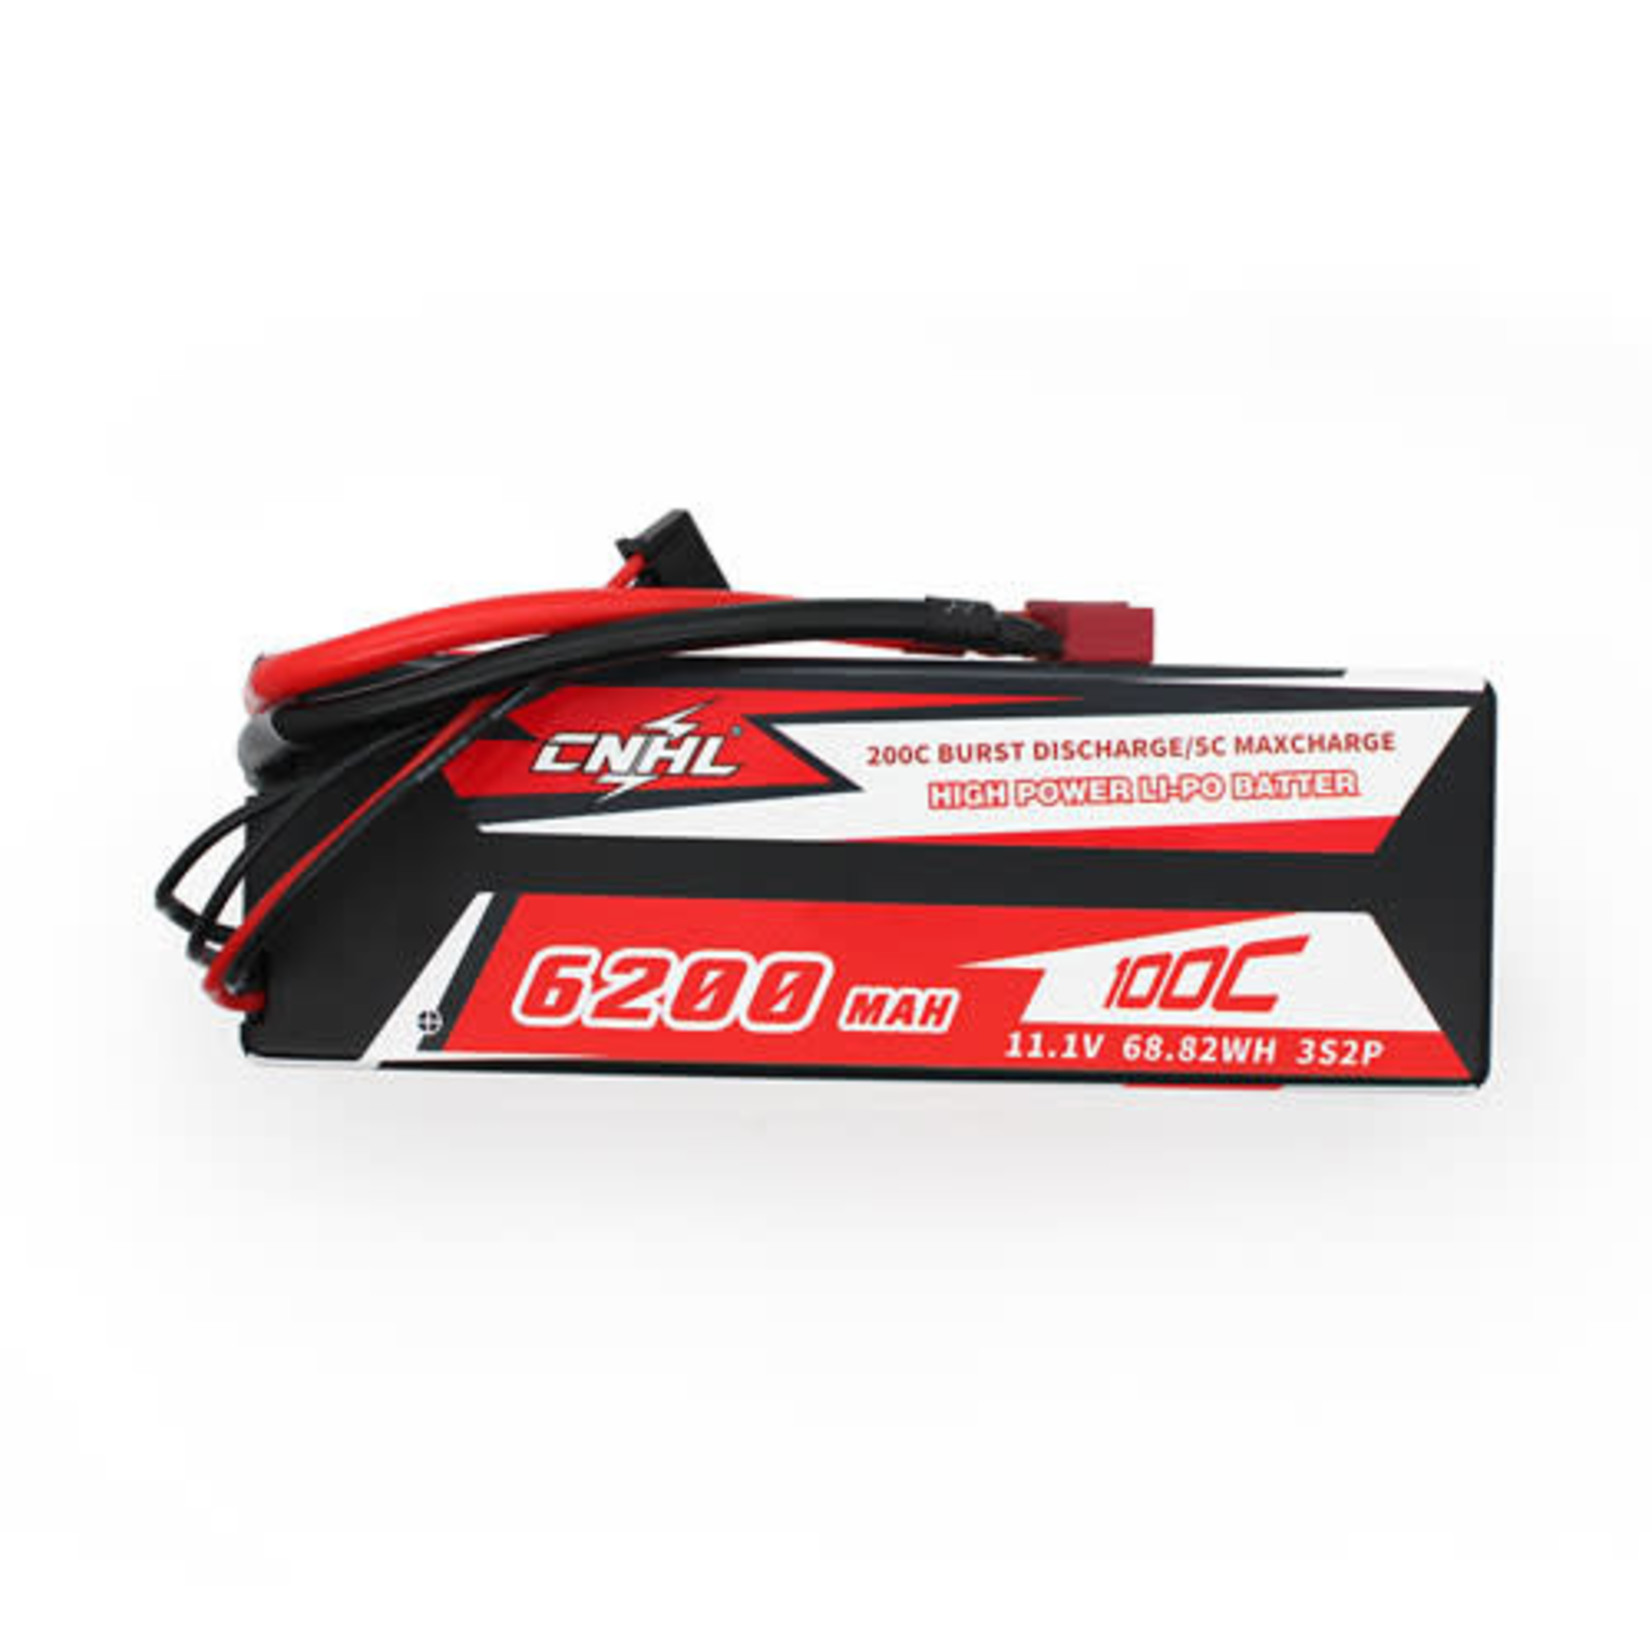 CNHL Racing CNHL Racing Series 6200MAH 11.1V 3S 100C Lipo Battery Hard Case with Deans Plug #HC6201003